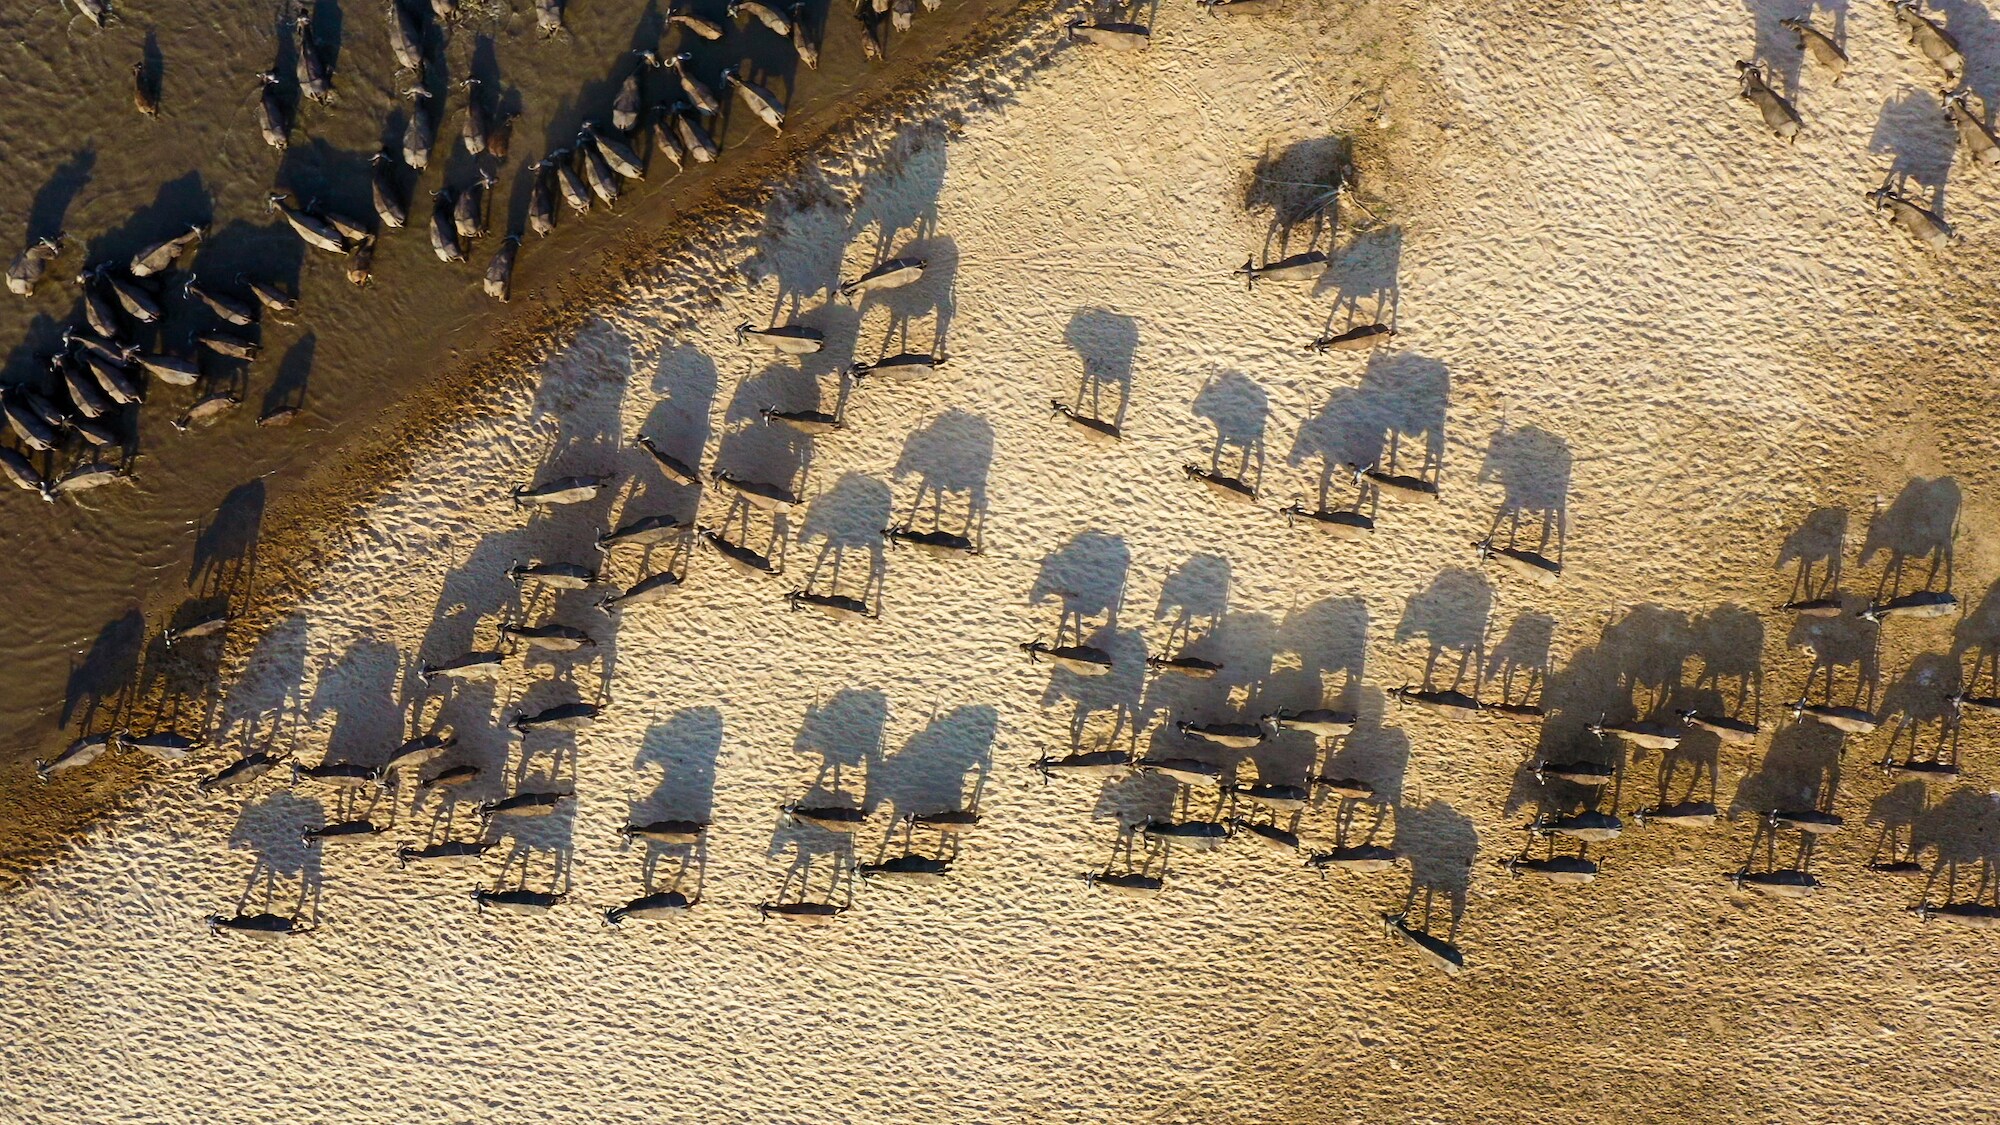 A herd of buffalo walking towards river. (Credit: National Geographic/Bertie Gregory for Disney+)